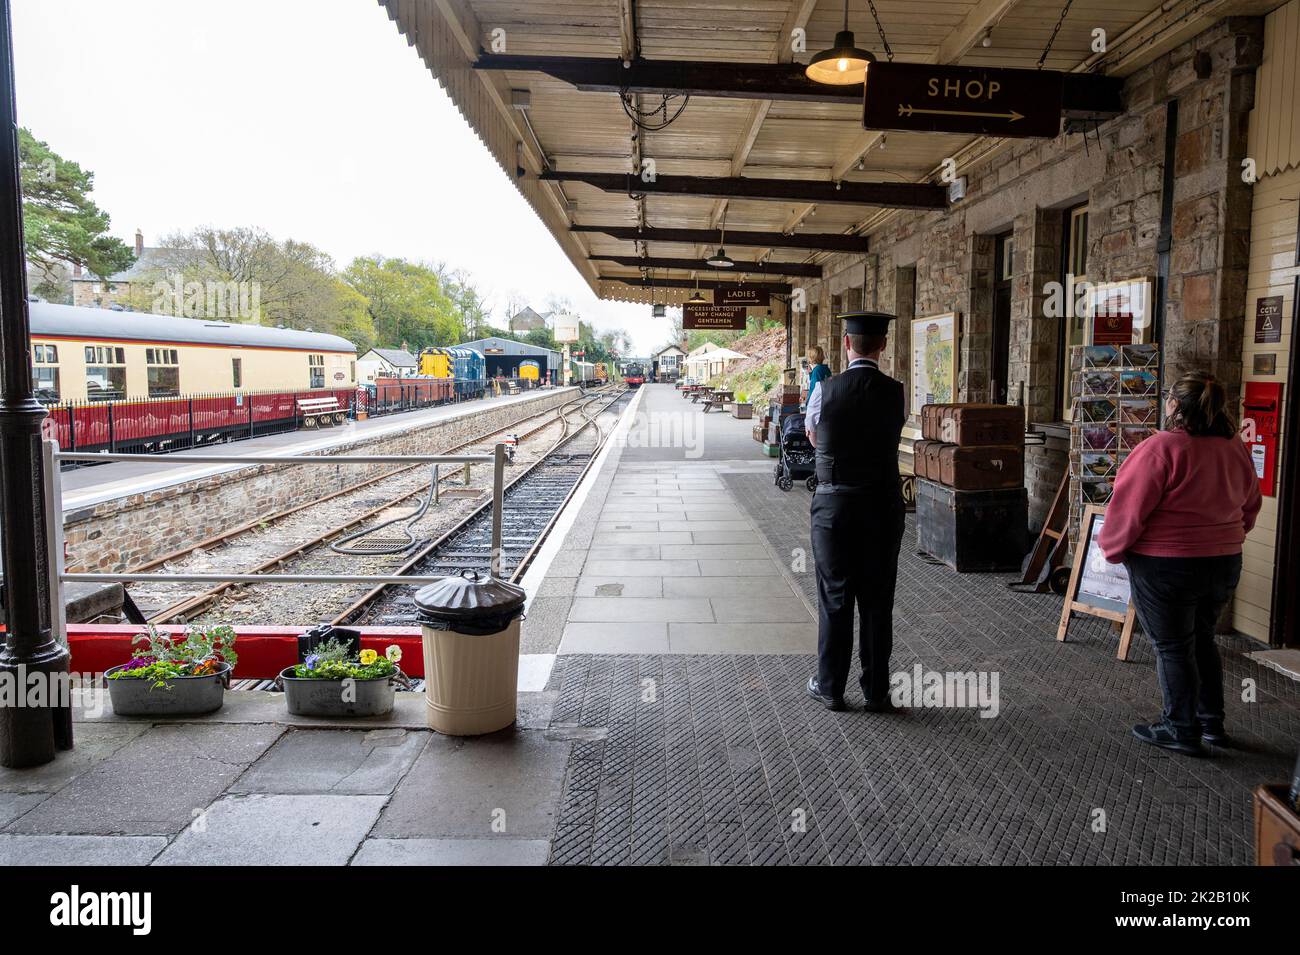 The Bodmin and Wenford heritage rail with stations and staff dressed for the period, organising steam train rides for the public. Cornwall, UK Stock Photo